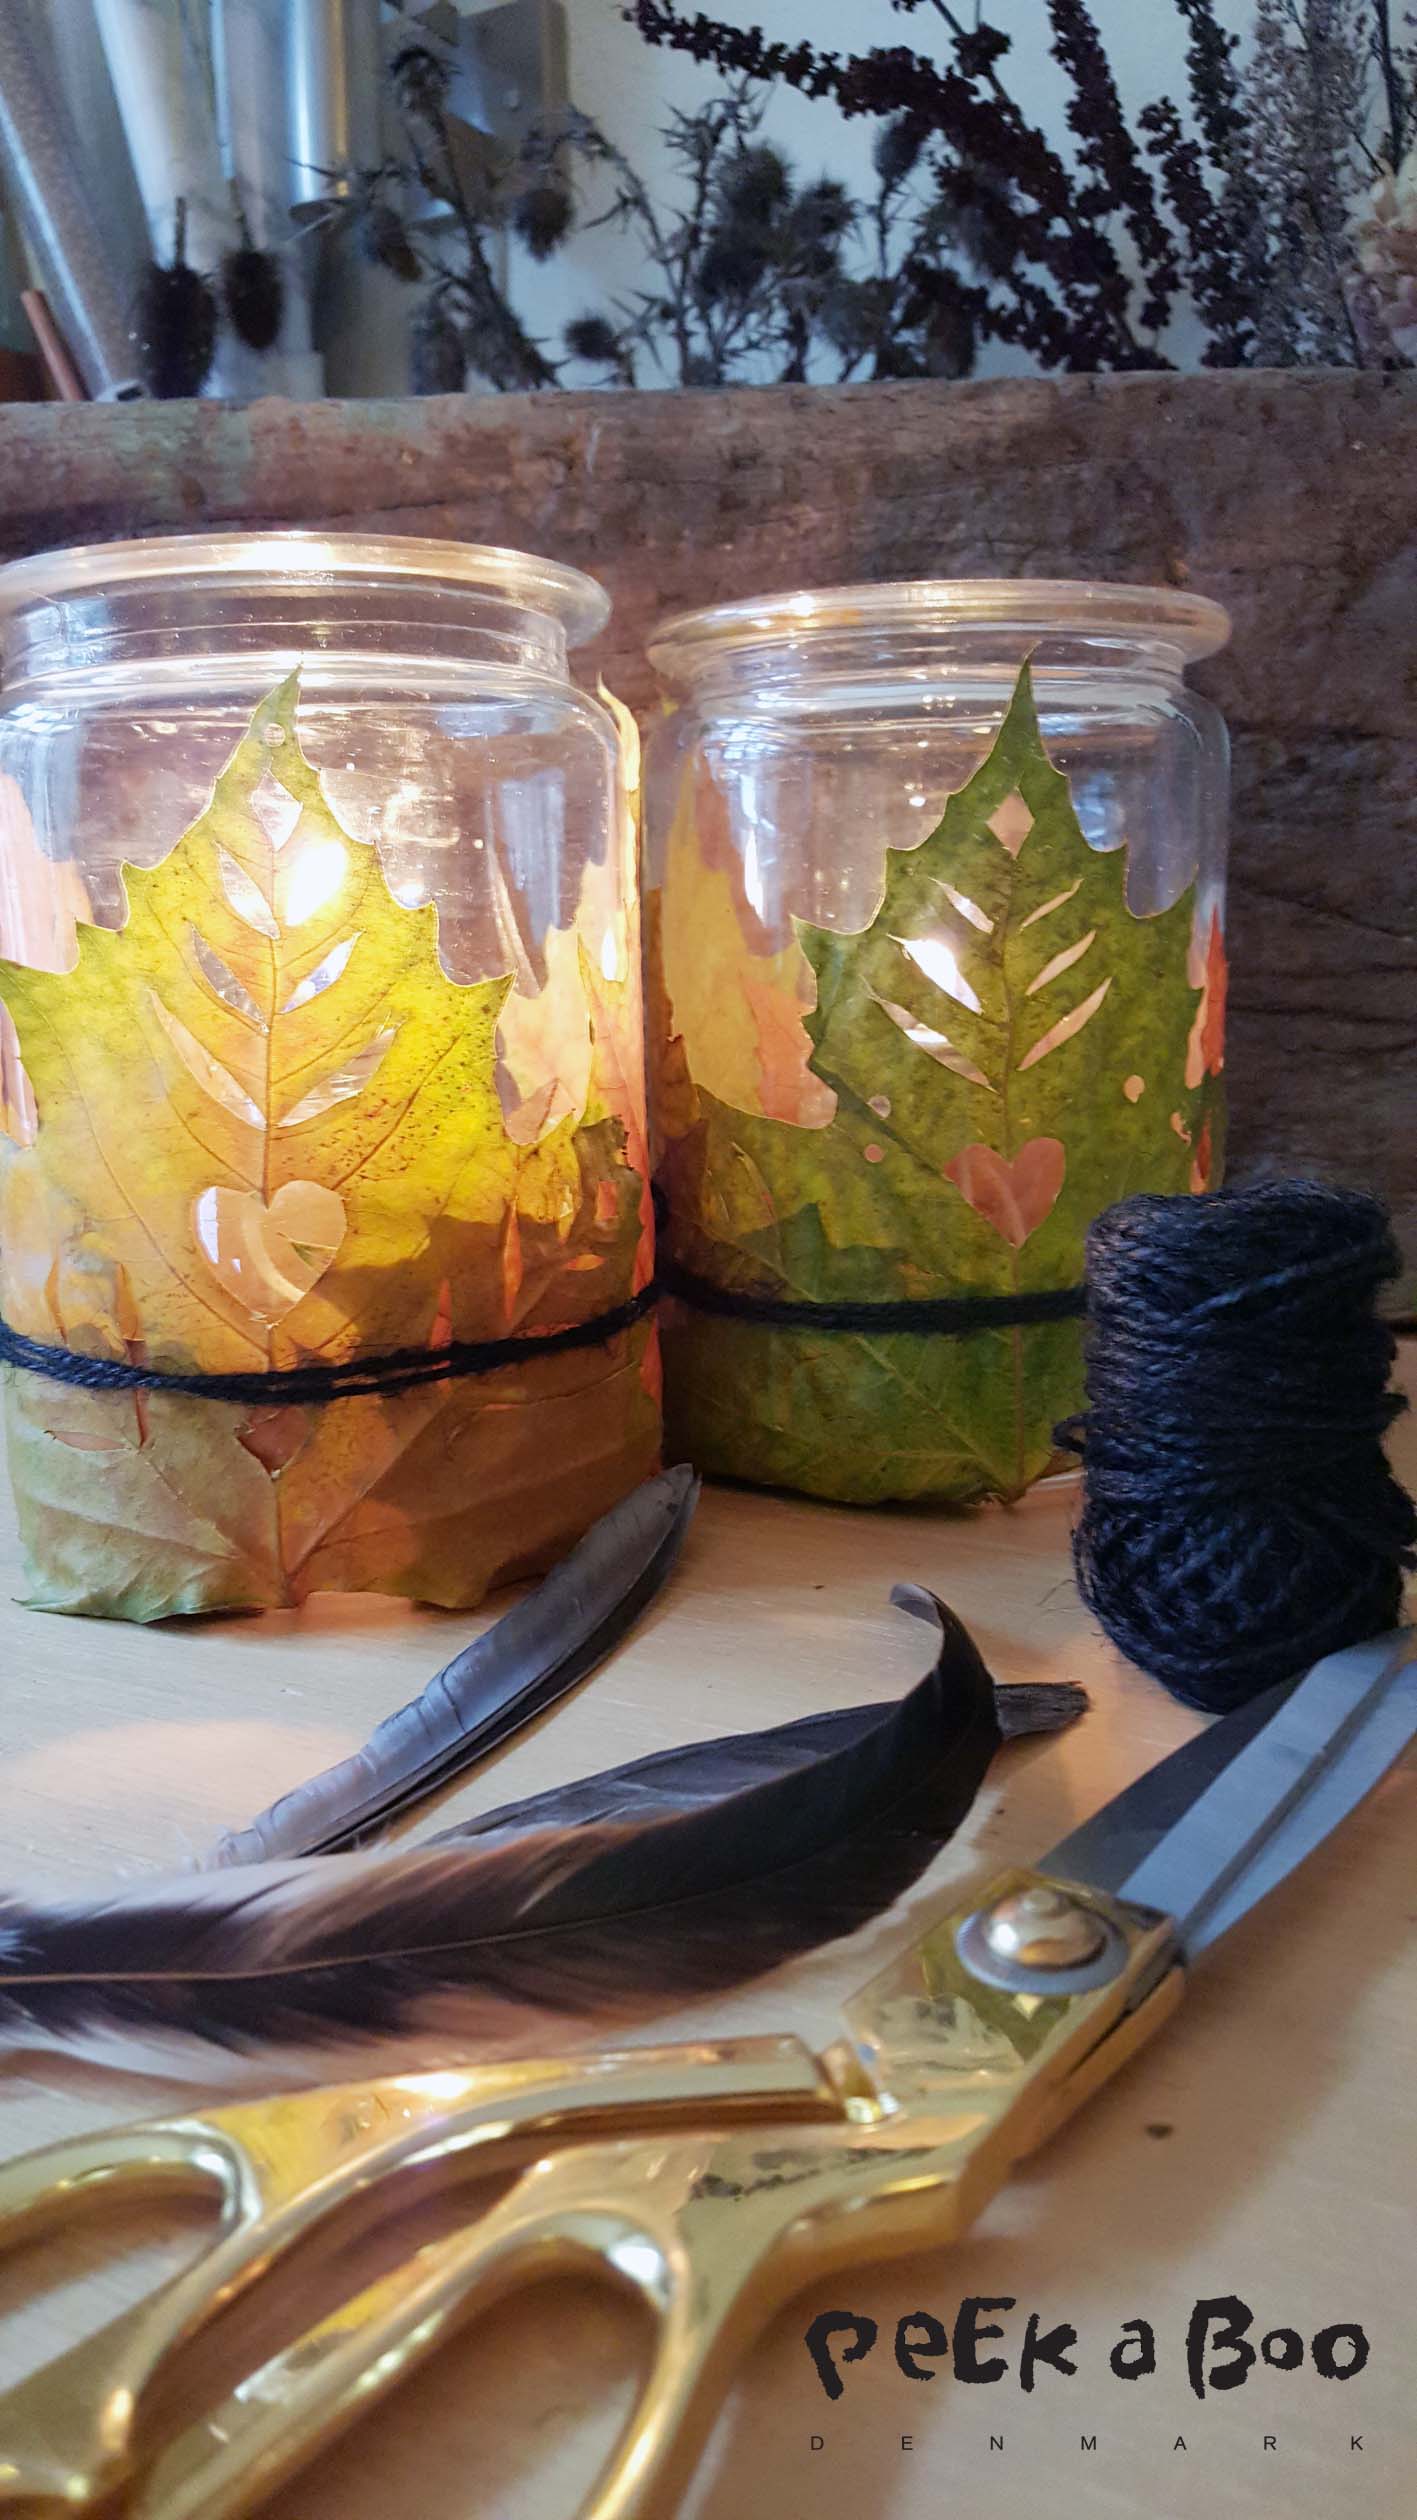 the lanterns with autumn leafs are easy made and will make a unique decoration in your home.